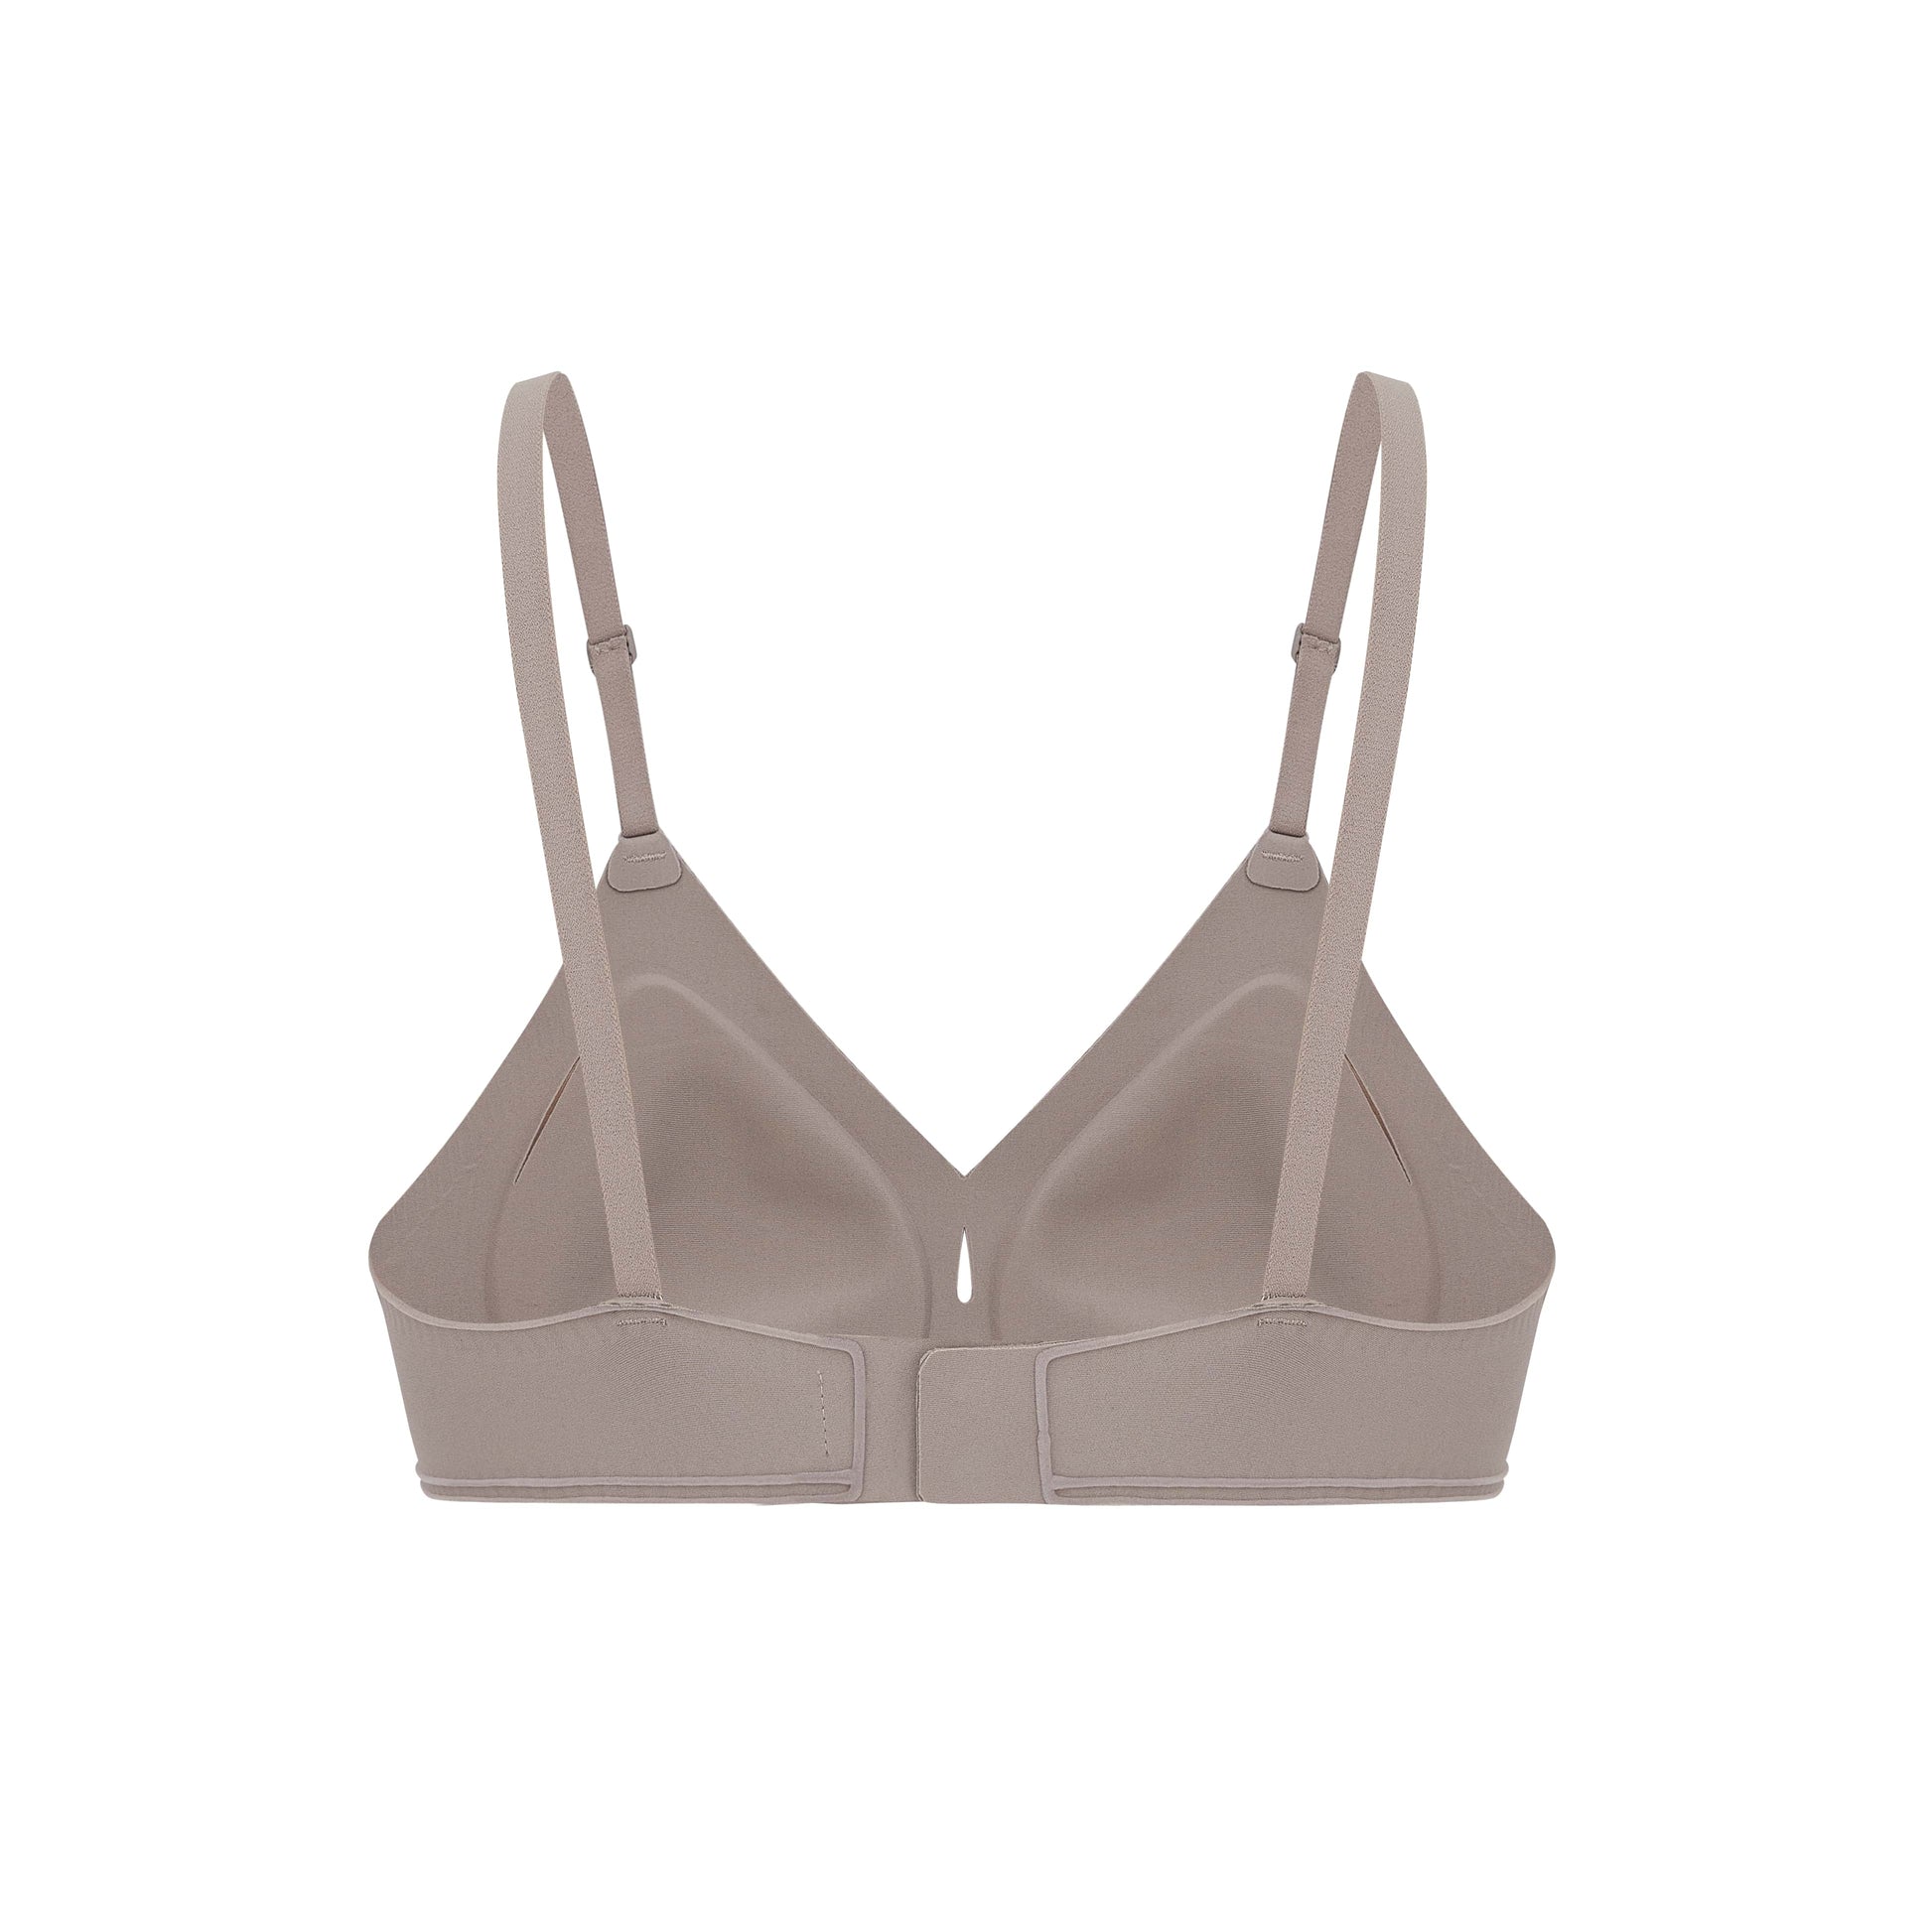 NEIWAI - Just like the similar cutout bra, our 3D Smile Support